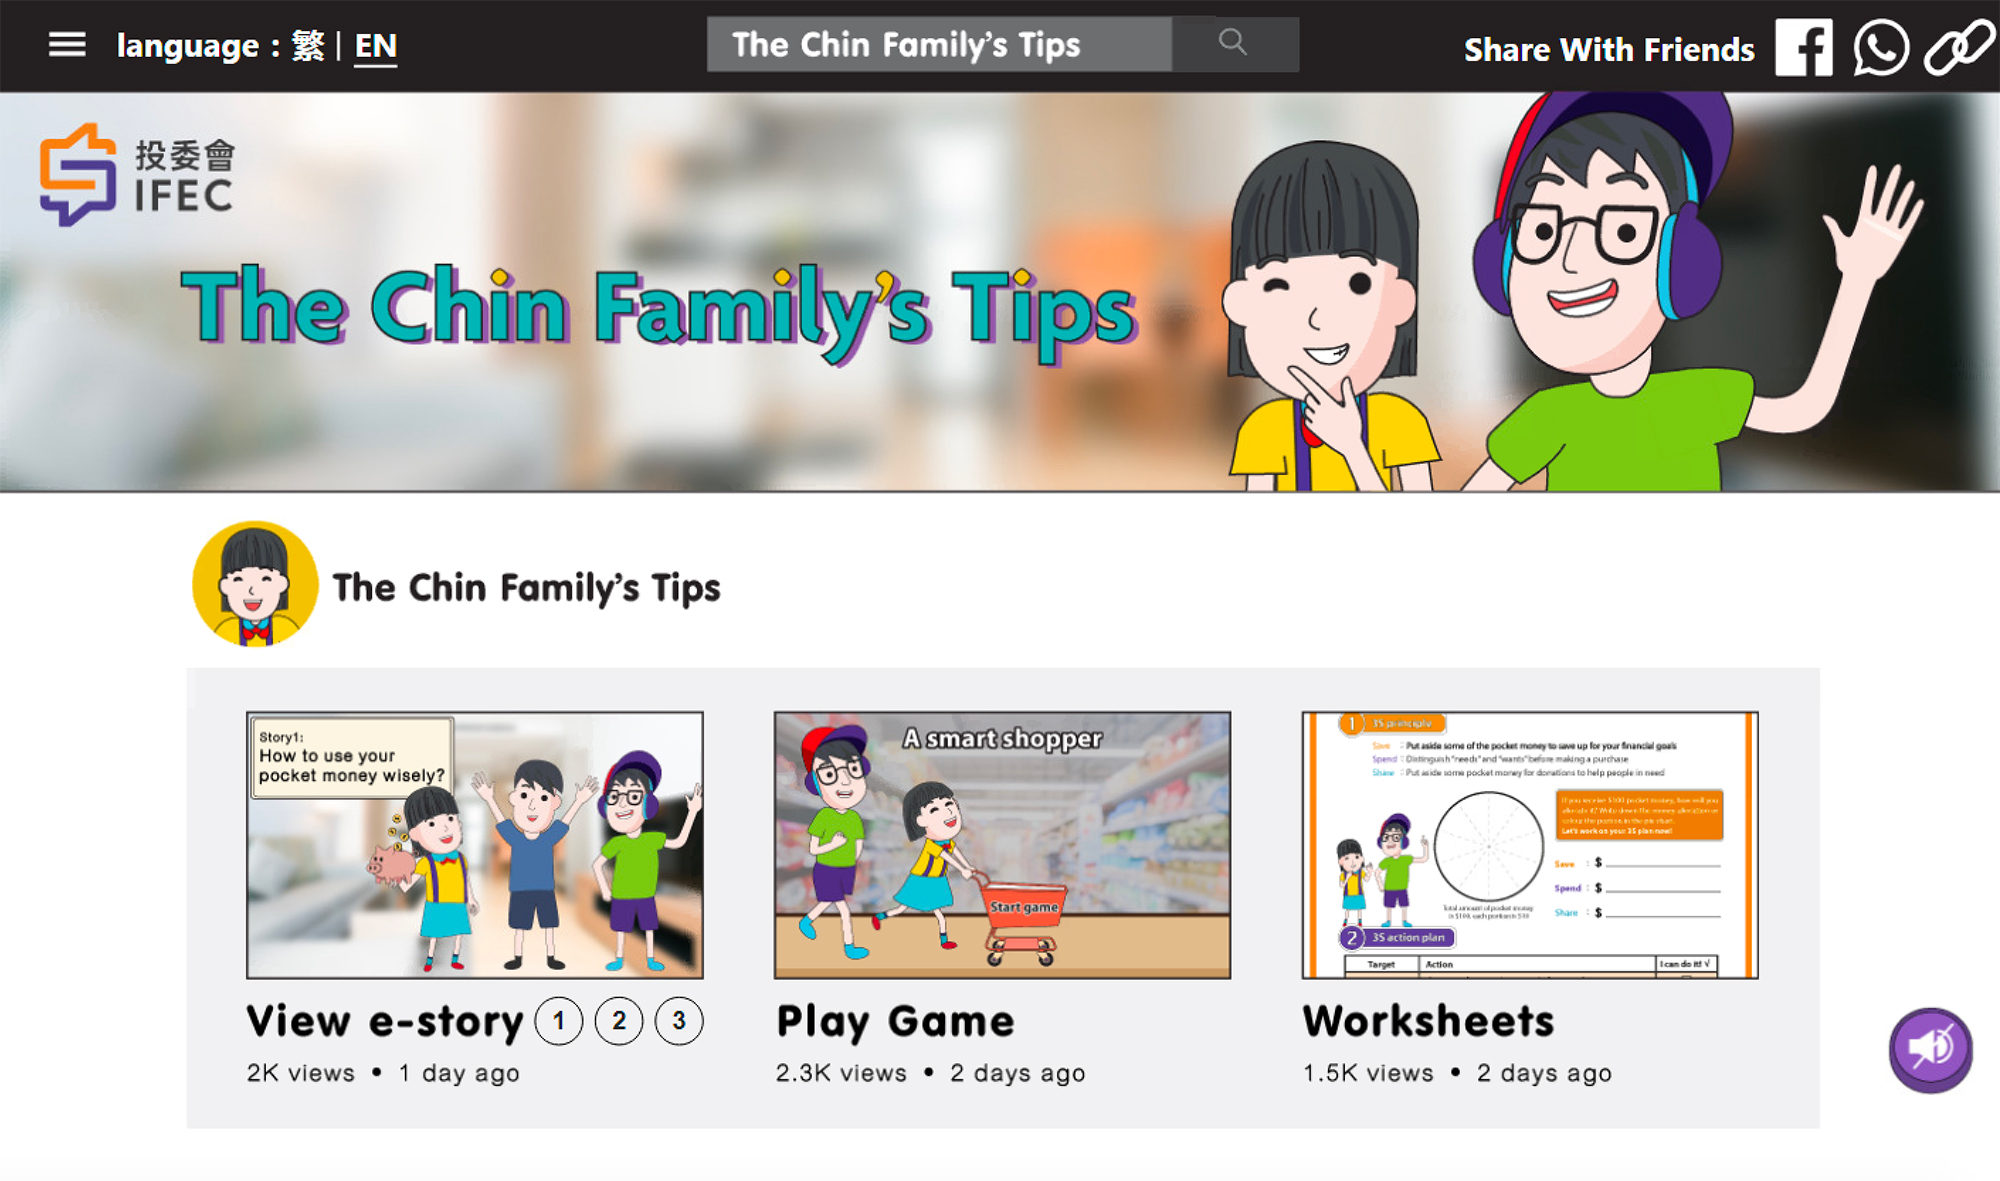 The Chin Family’s tips (Aged 9-11)